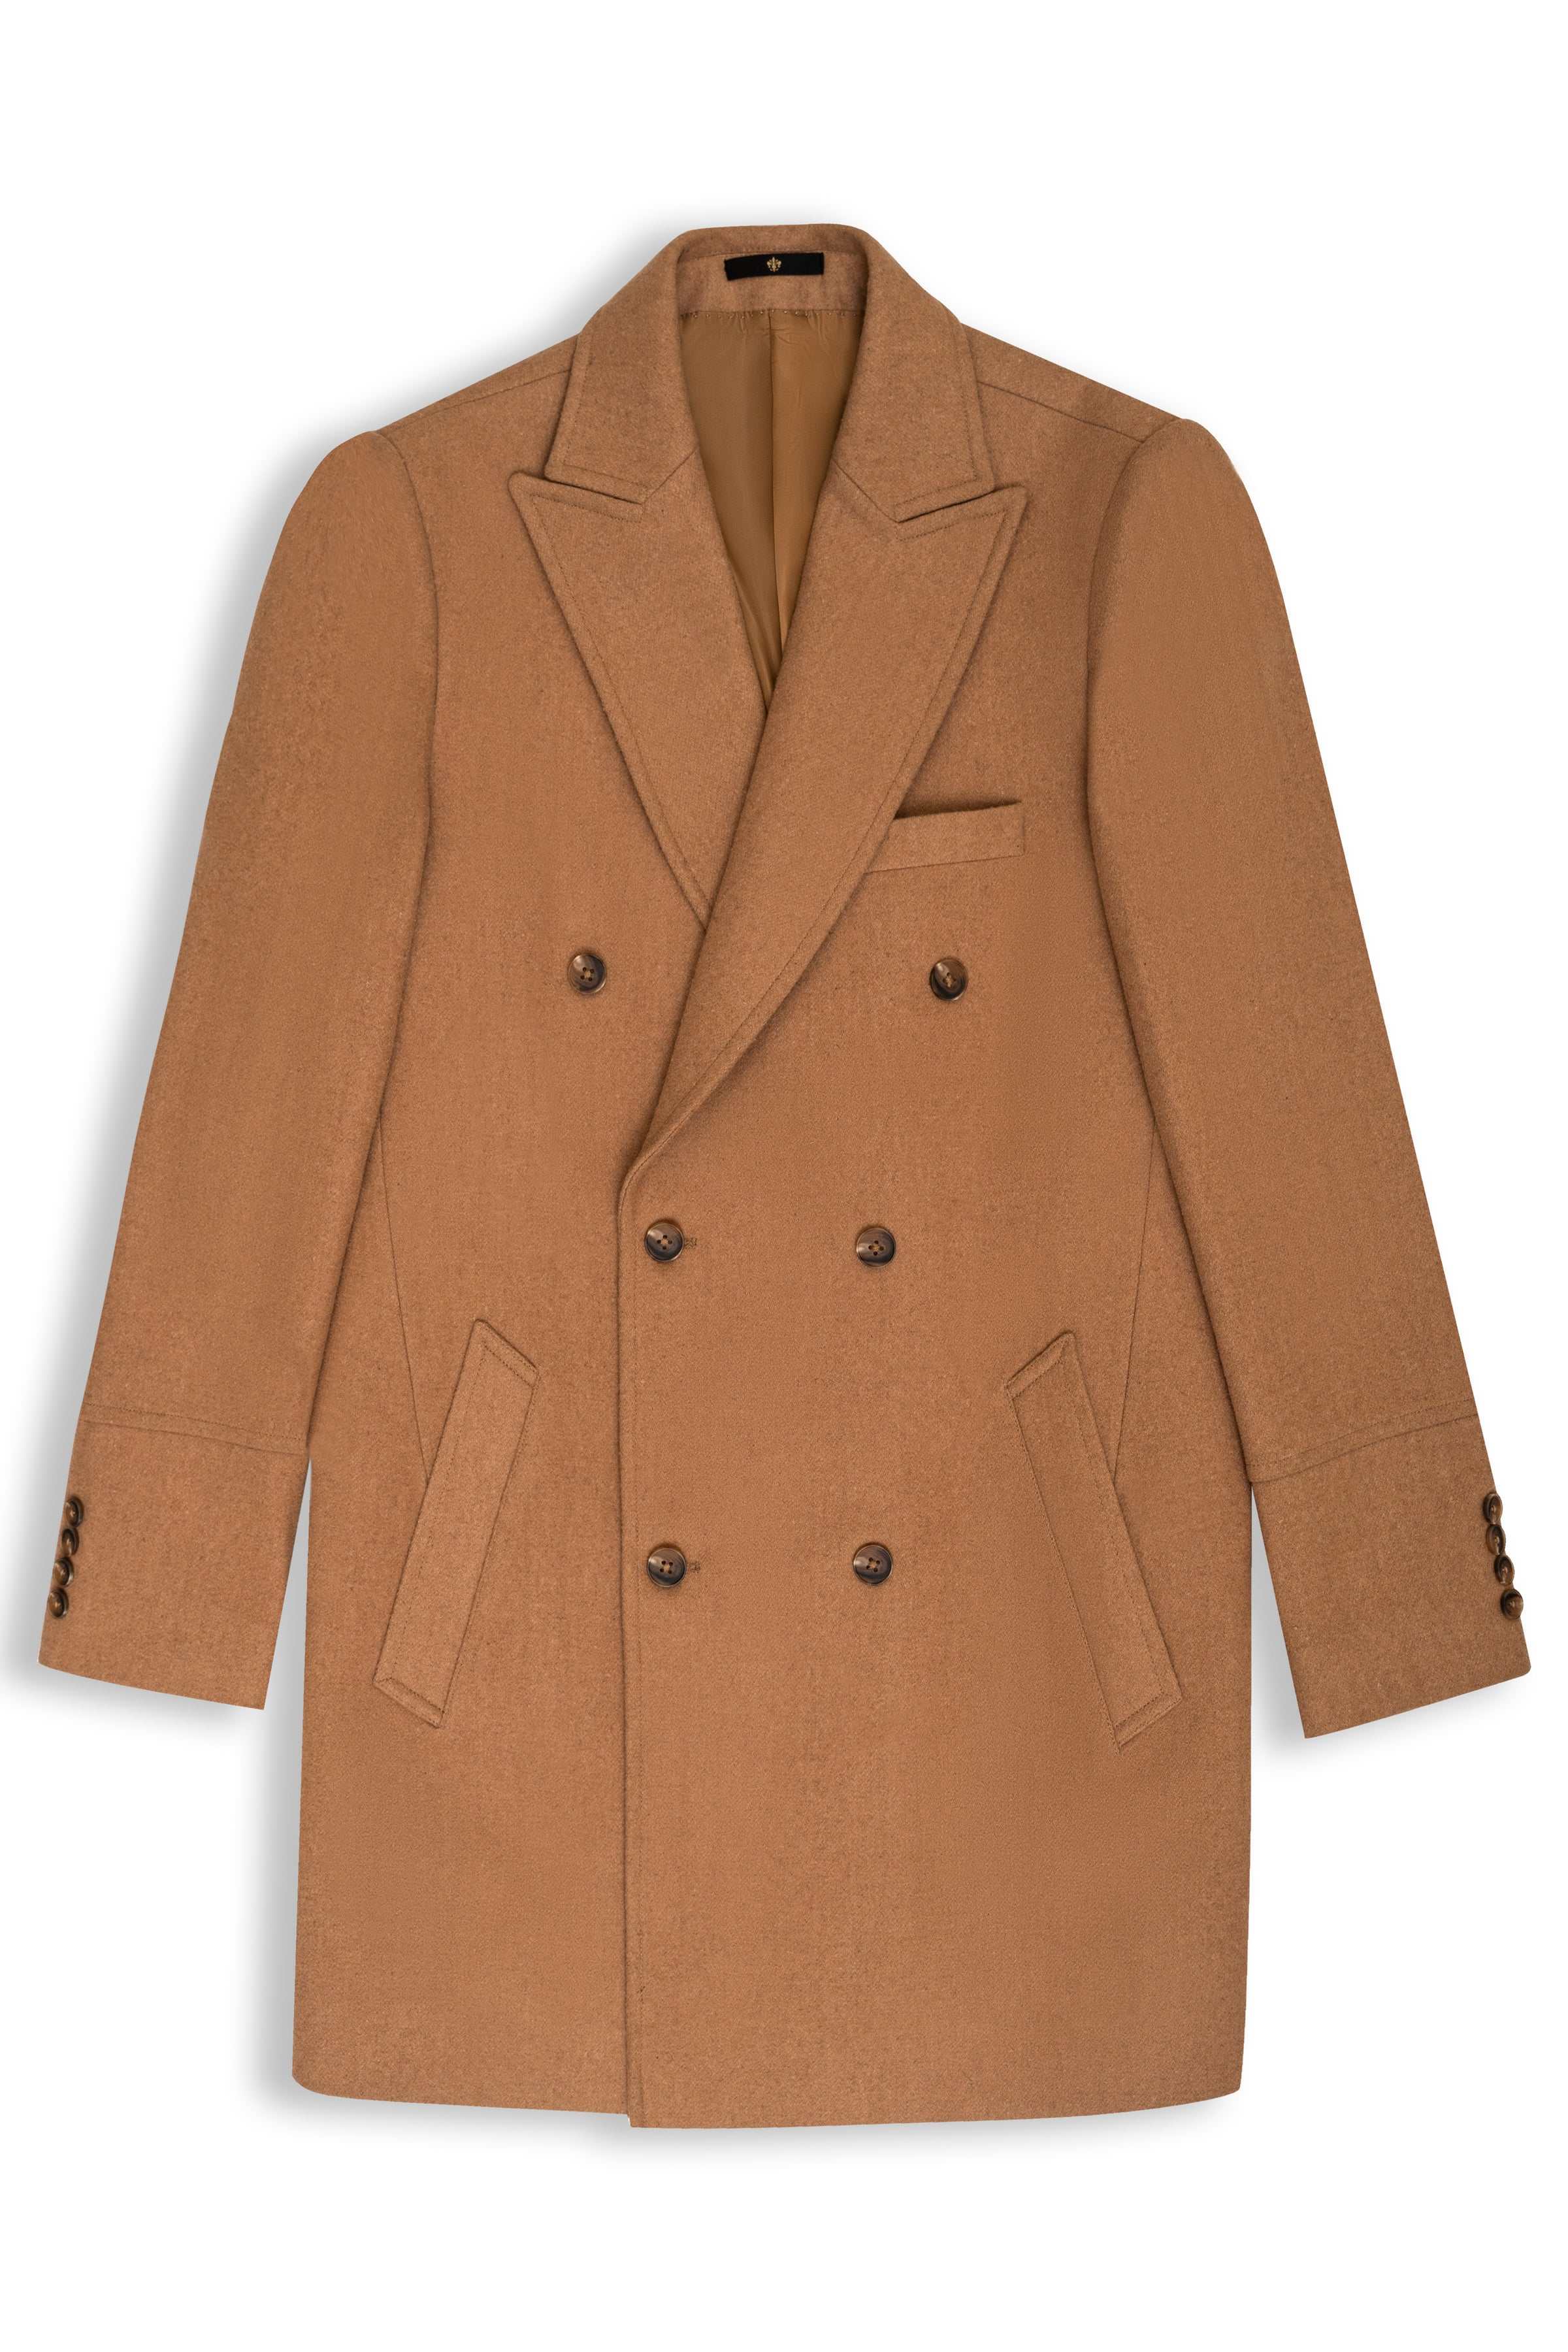 WOOLEN LONG COAT DOUBLE BREASTED KHAKI at Charcoal Clothing